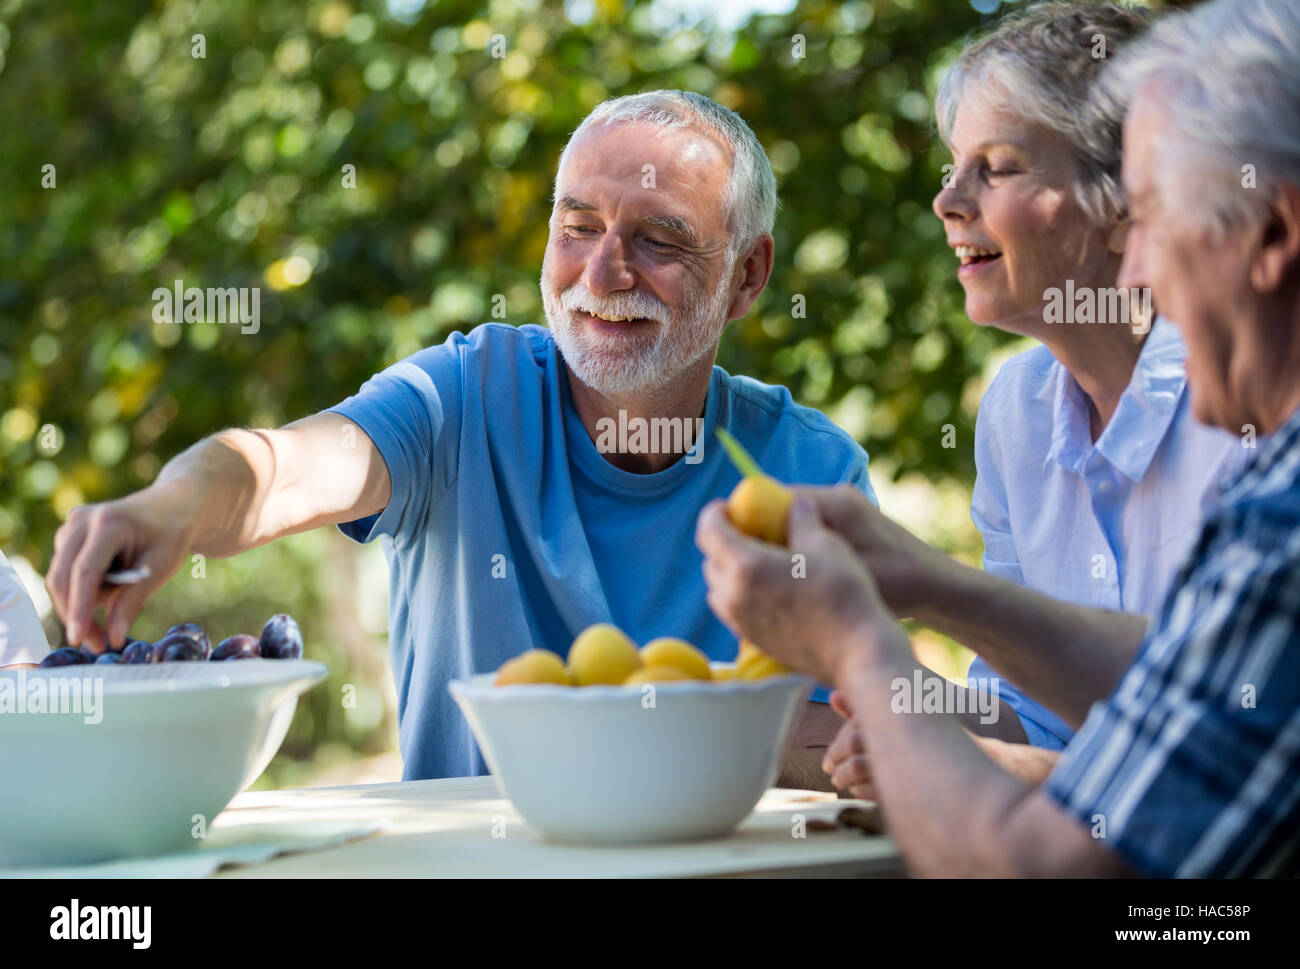 Senior couples removing seeds of apricot fruits in garden Stock Photo